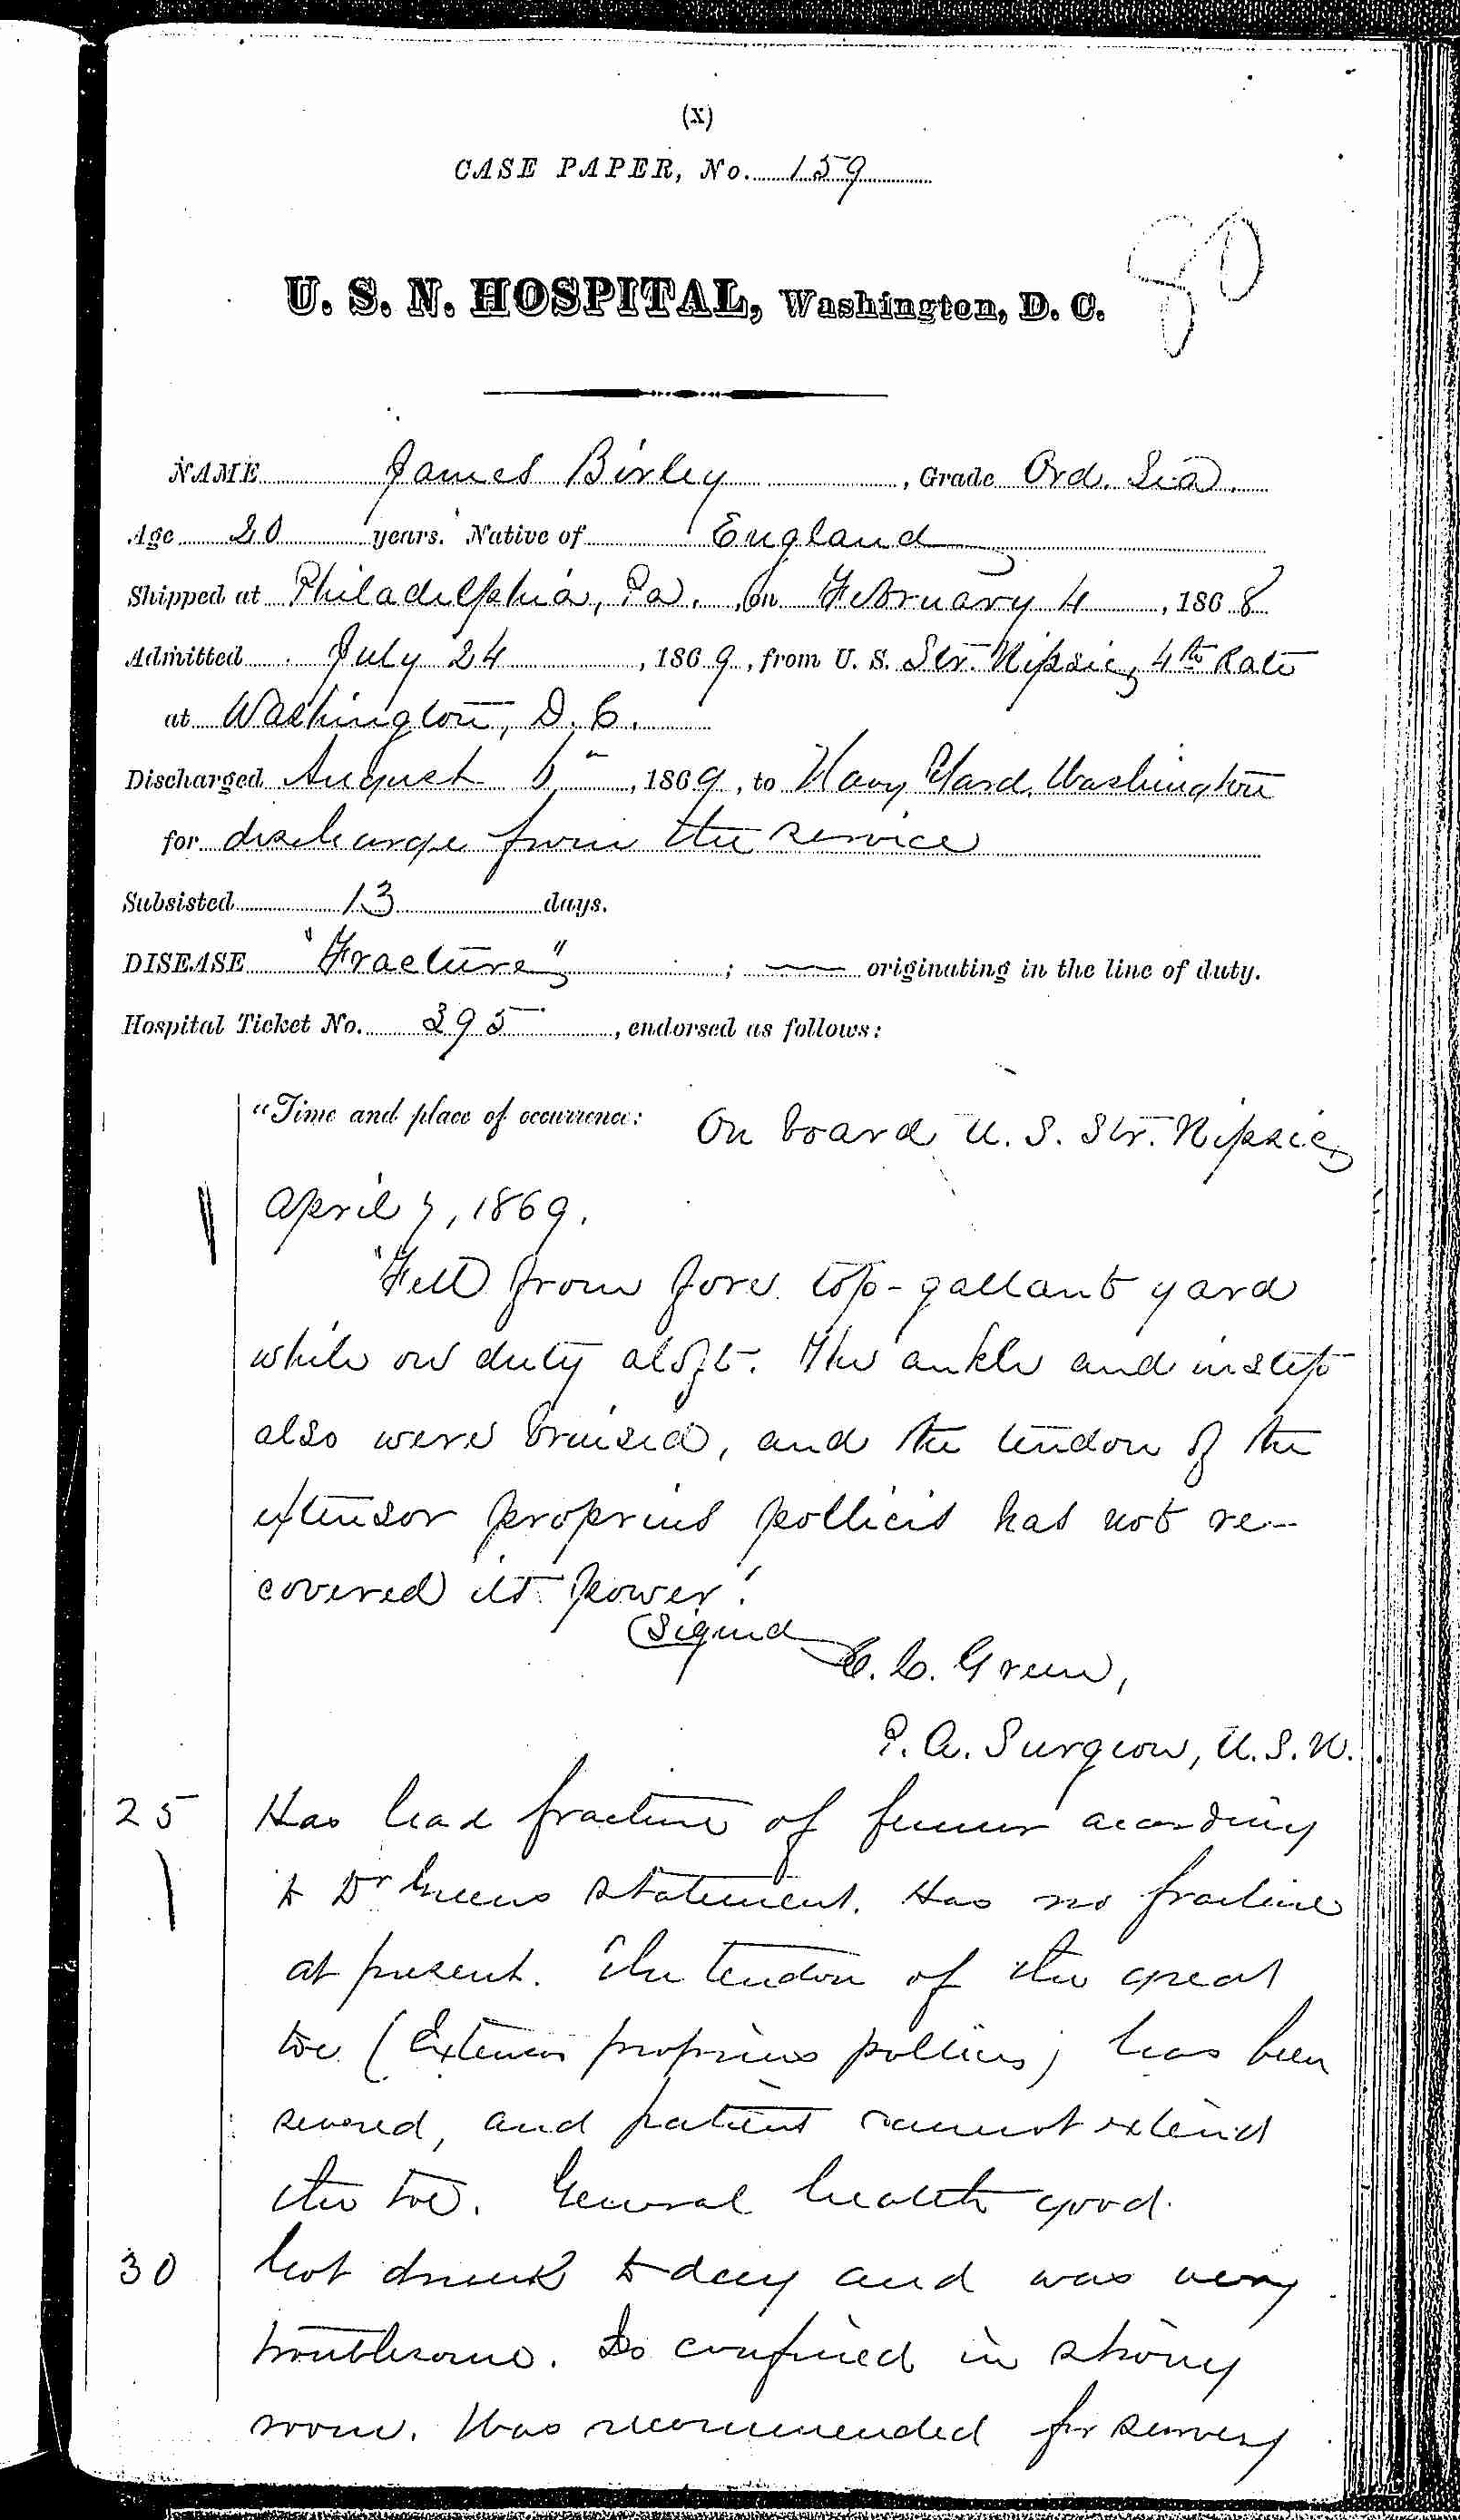 Entry for James Birley (page 1 of 2) in the log Hospital Tickets and Case Papers - Naval Hospital - Washington, D.C. - 1868-69